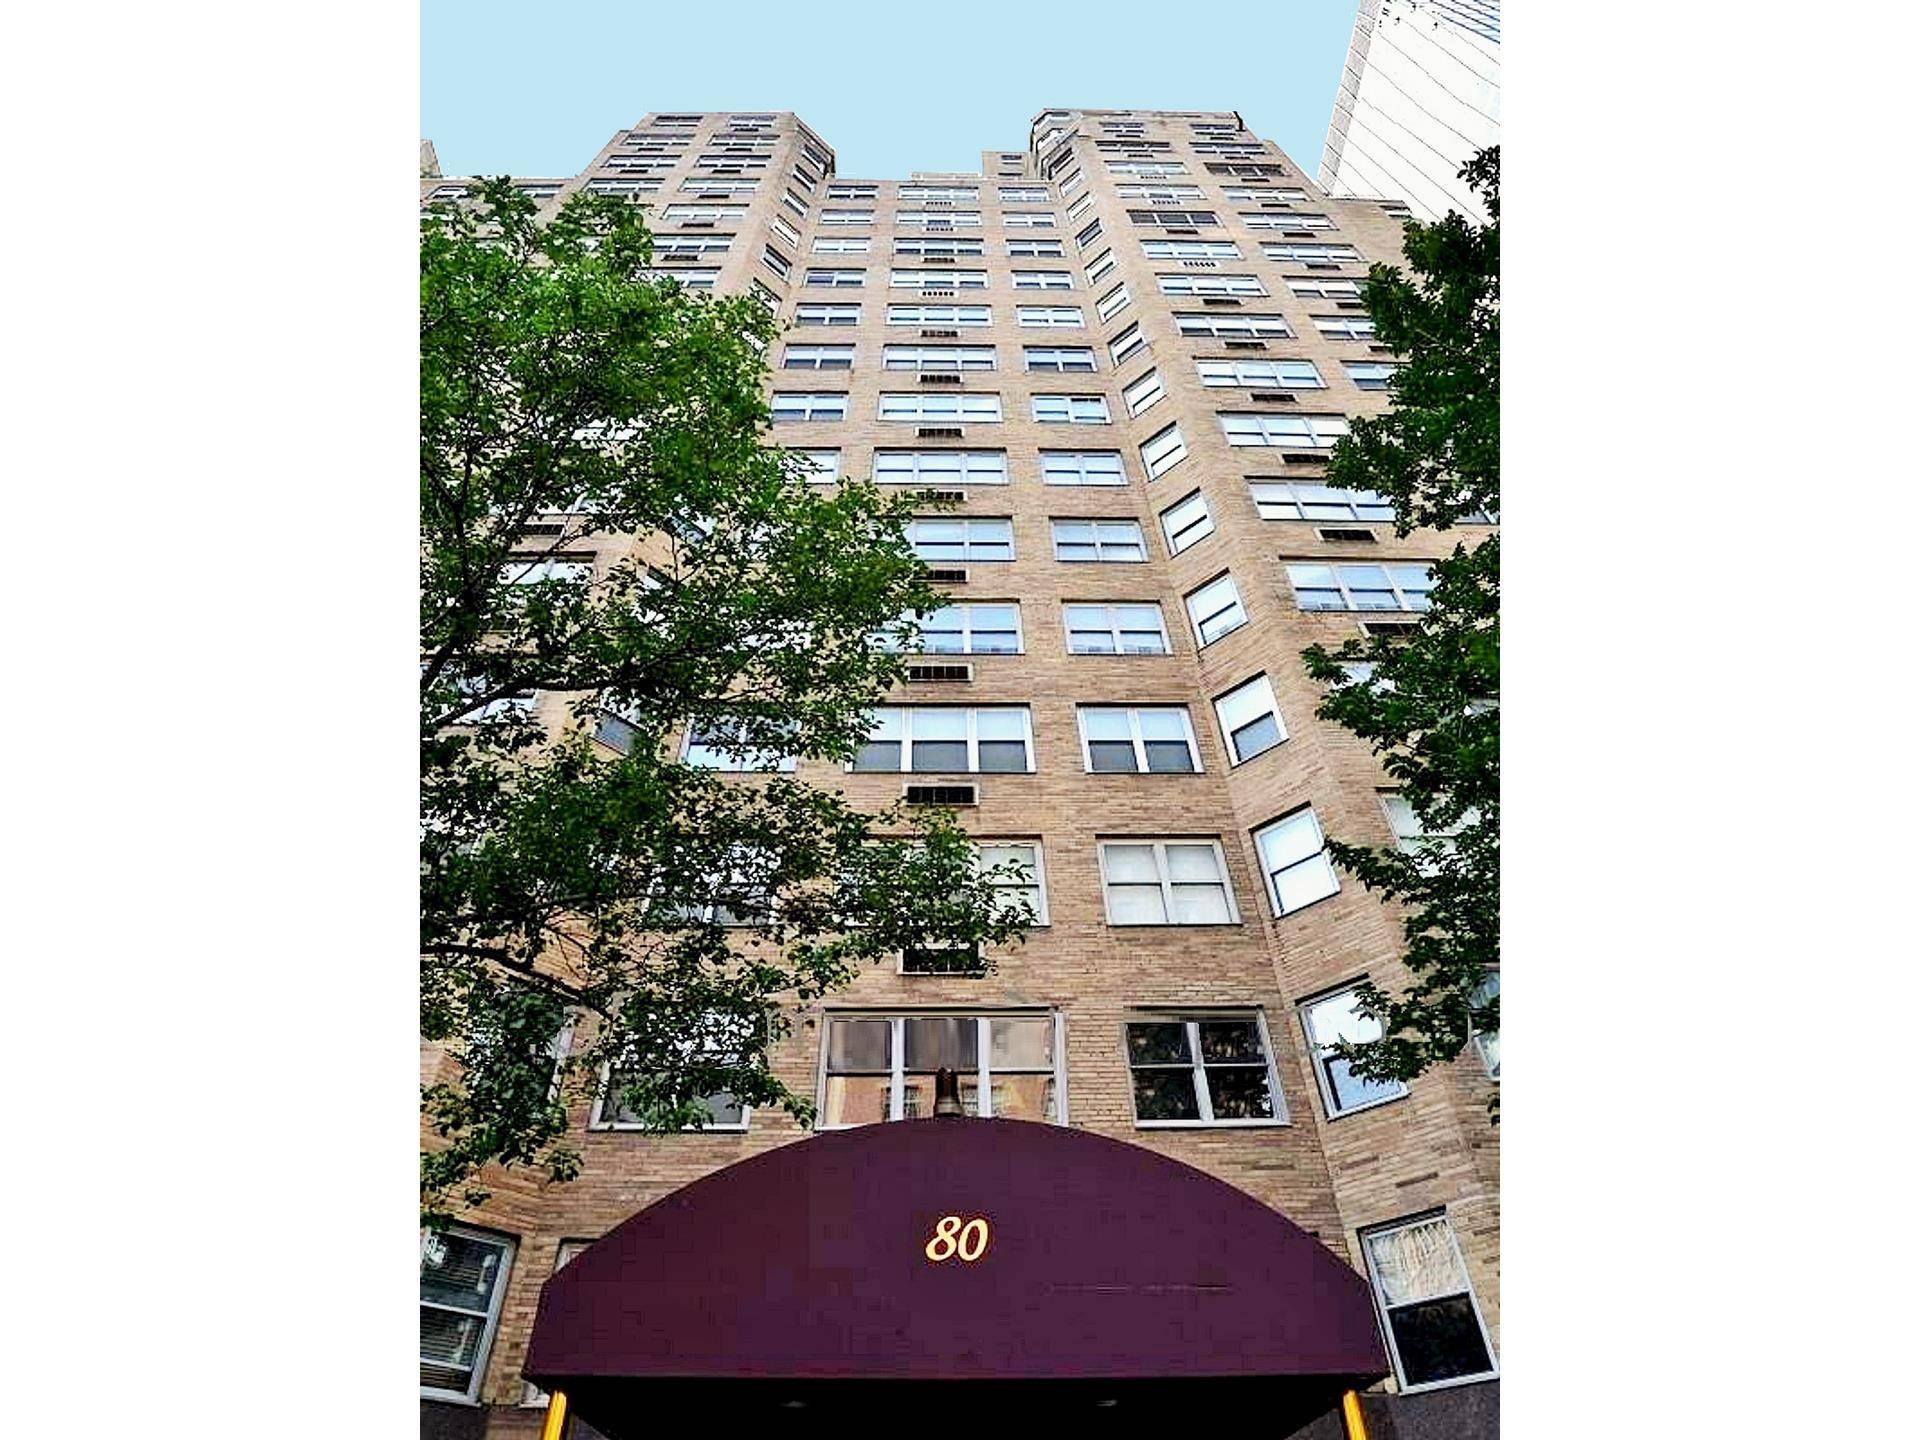 Rare Opportunity ! 1 bedroom Condo located on Park Avenue in the great area of Murray Hill.